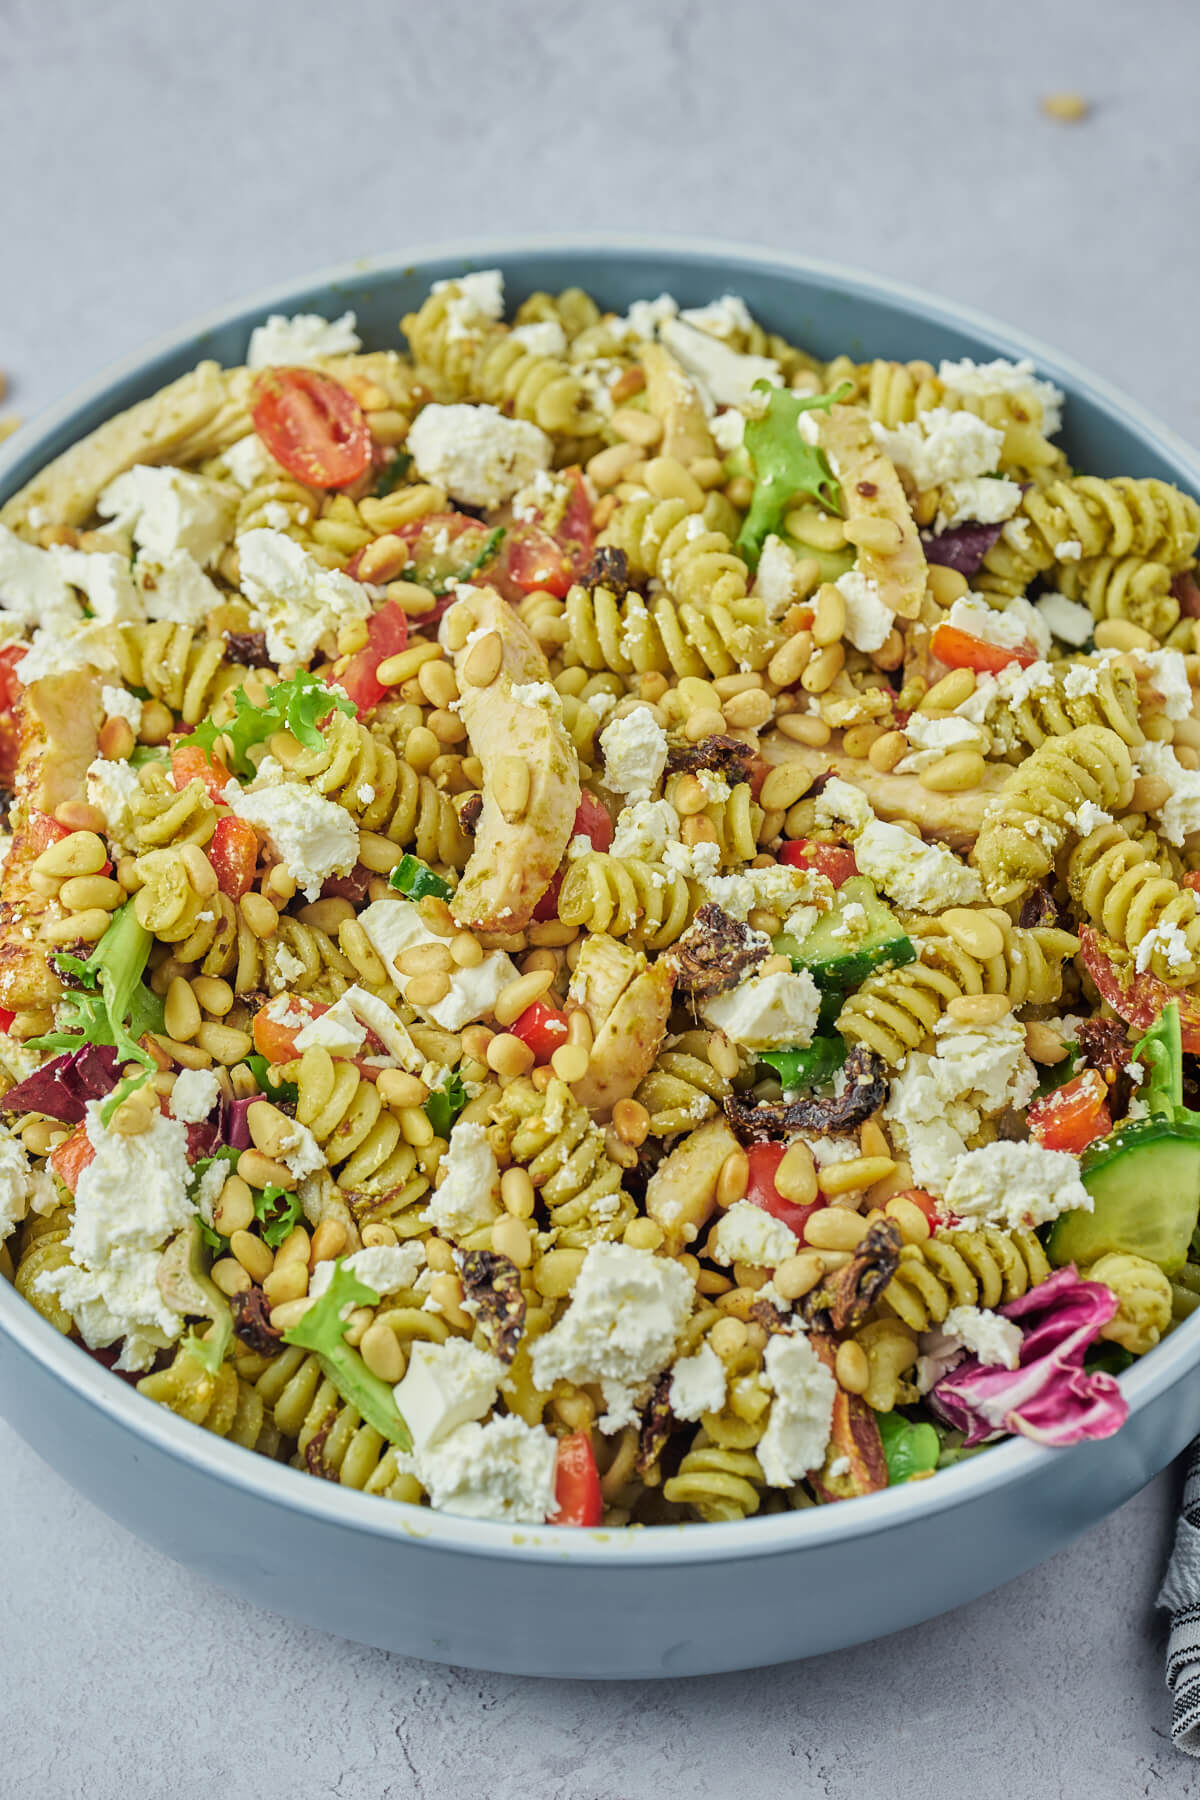 A Danish pasta salad with chicken, pesto, feta and pine nuts